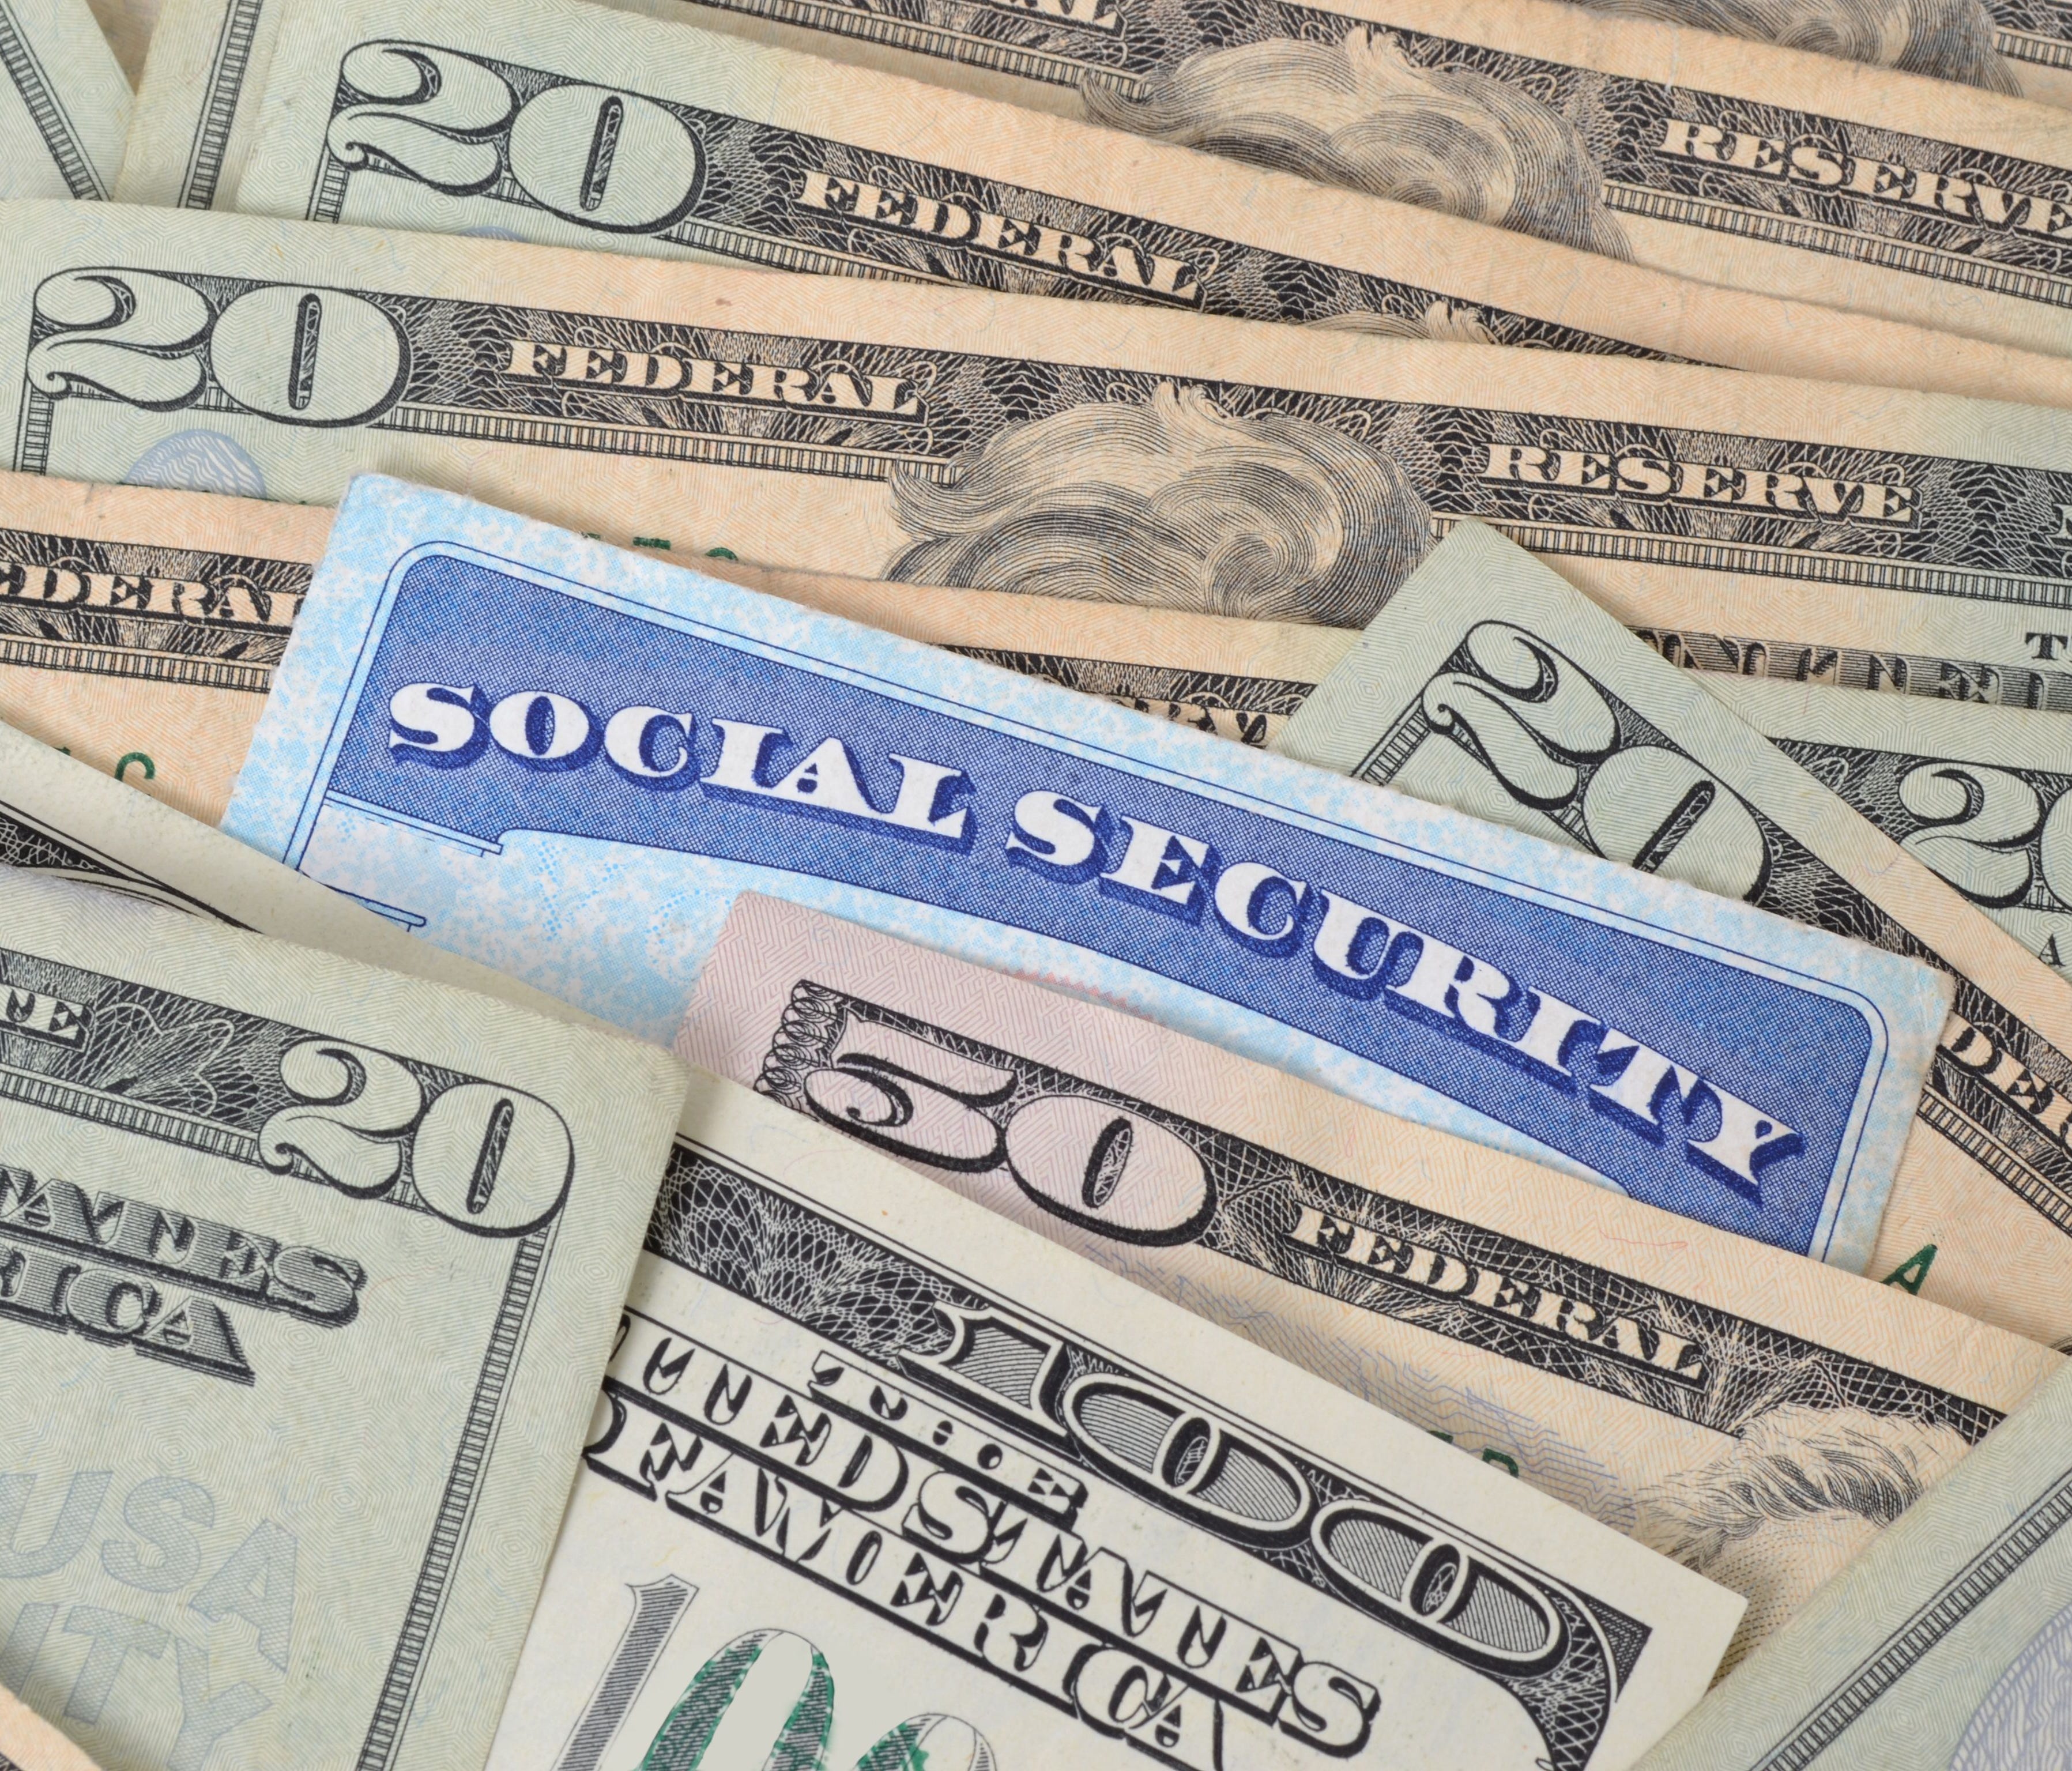 Get rid of that notion that retirement must be a time to cut costs and pinch pennies. Rather, plenty of people seem to be in a position to splurge a bit after claiming Social Security benefits.